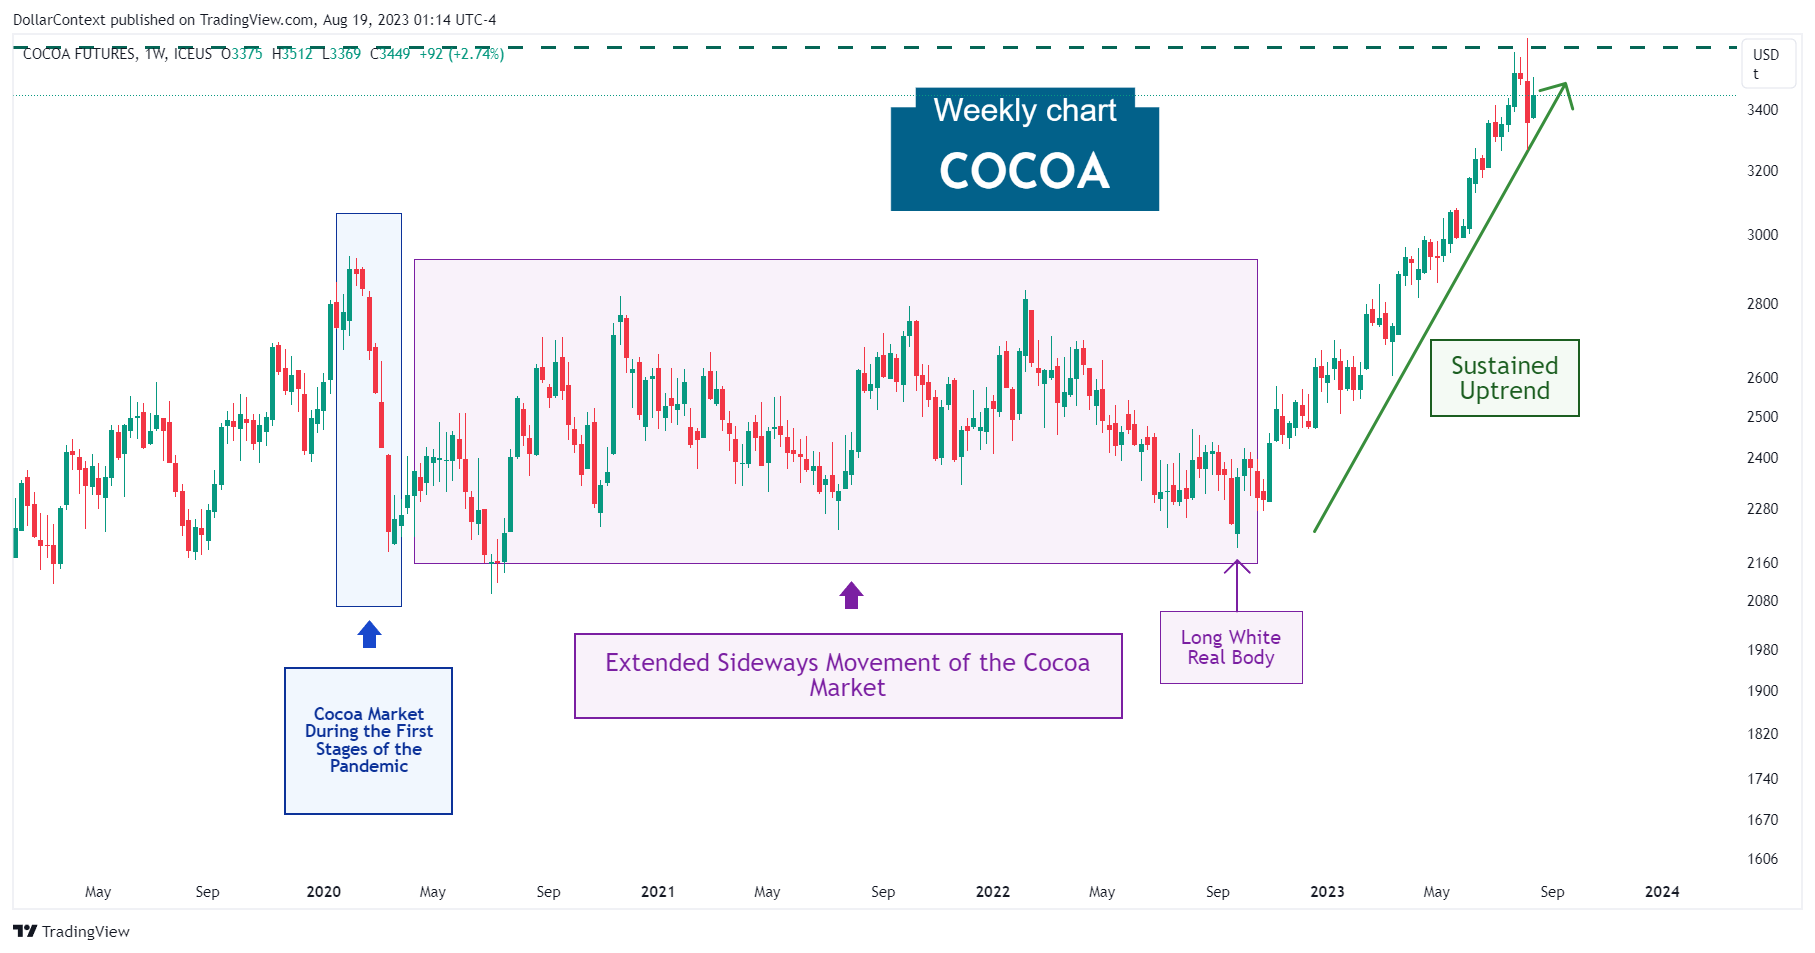 Cocoa: Sustained Uptrend in 2022 and 2023